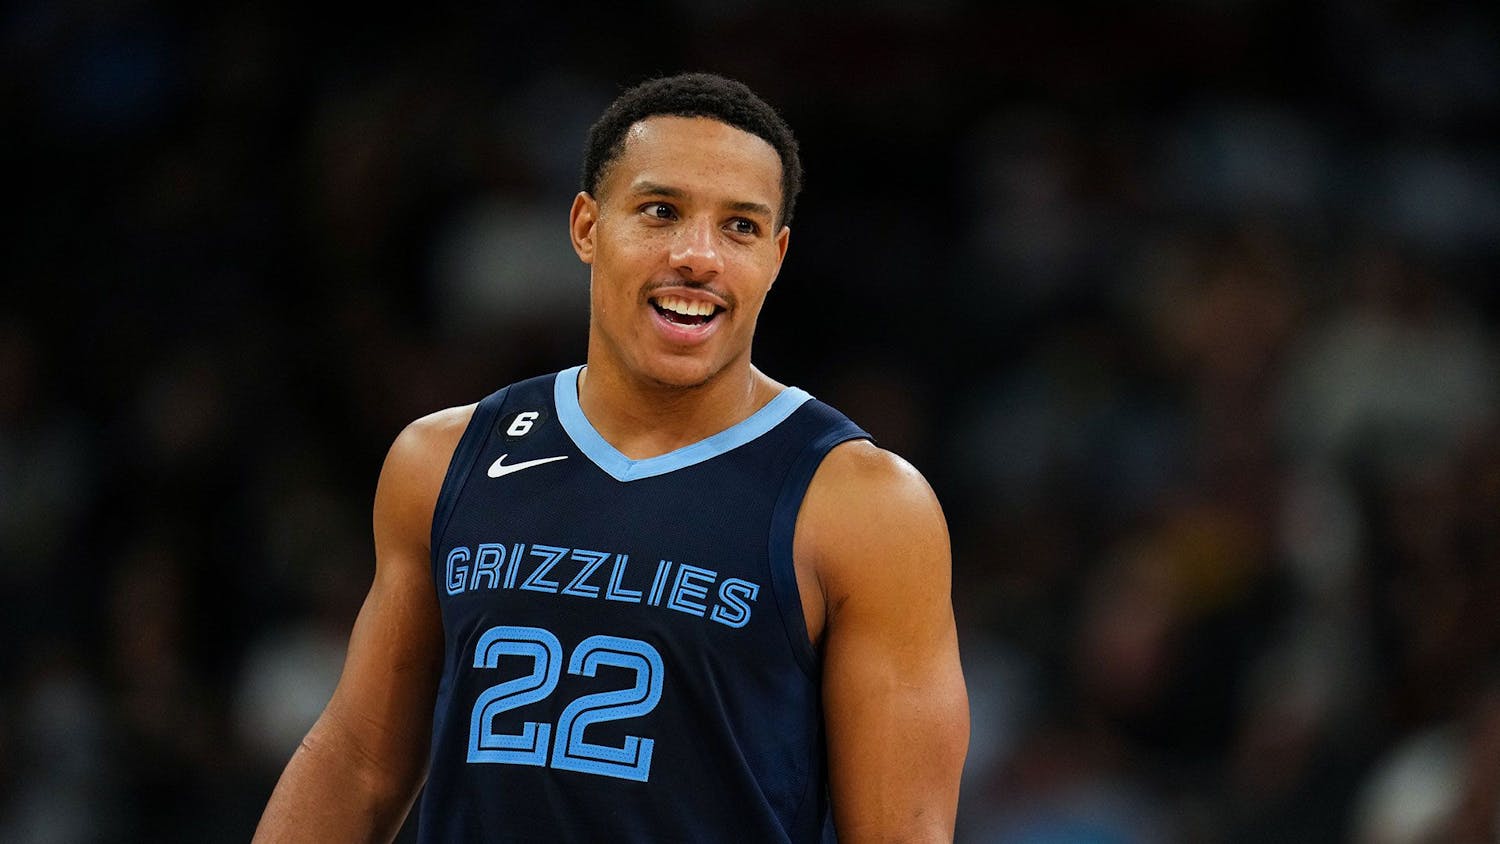 BREAKING NEWS: Desmond Bane Signs Largest Deal in Grizzlies History - The  Daily Helmsman